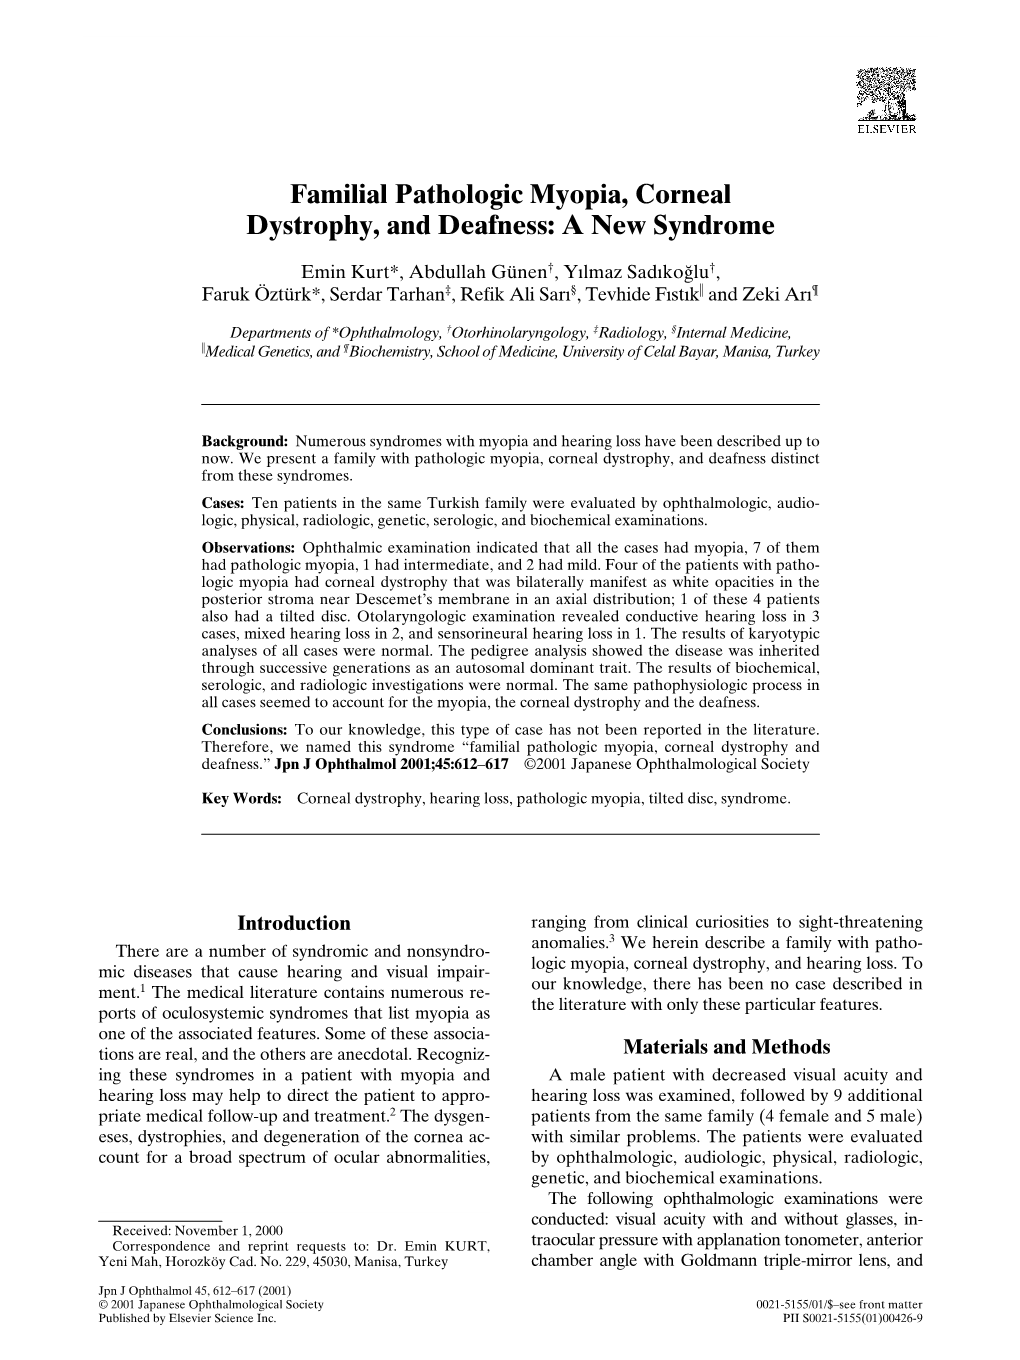 Familial Pathologic Myopia, Corneal Dystrophy, and Deafness: a New Syndrome